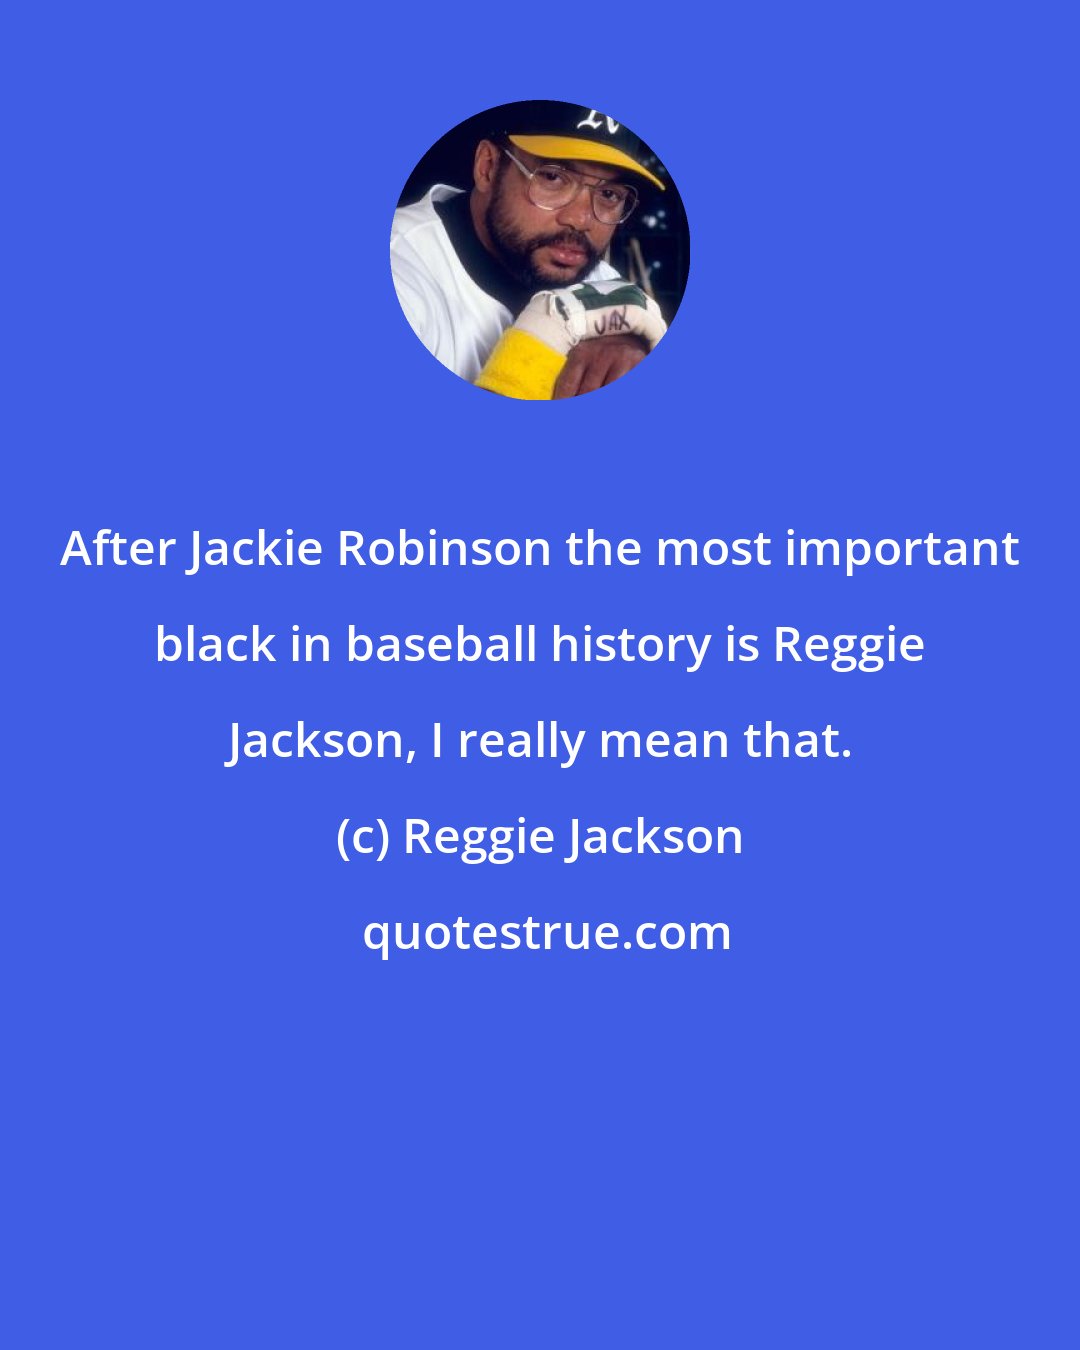 Reggie Jackson: After Jackie Robinson the most important black in baseball history is Reggie Jackson, I really mean that.